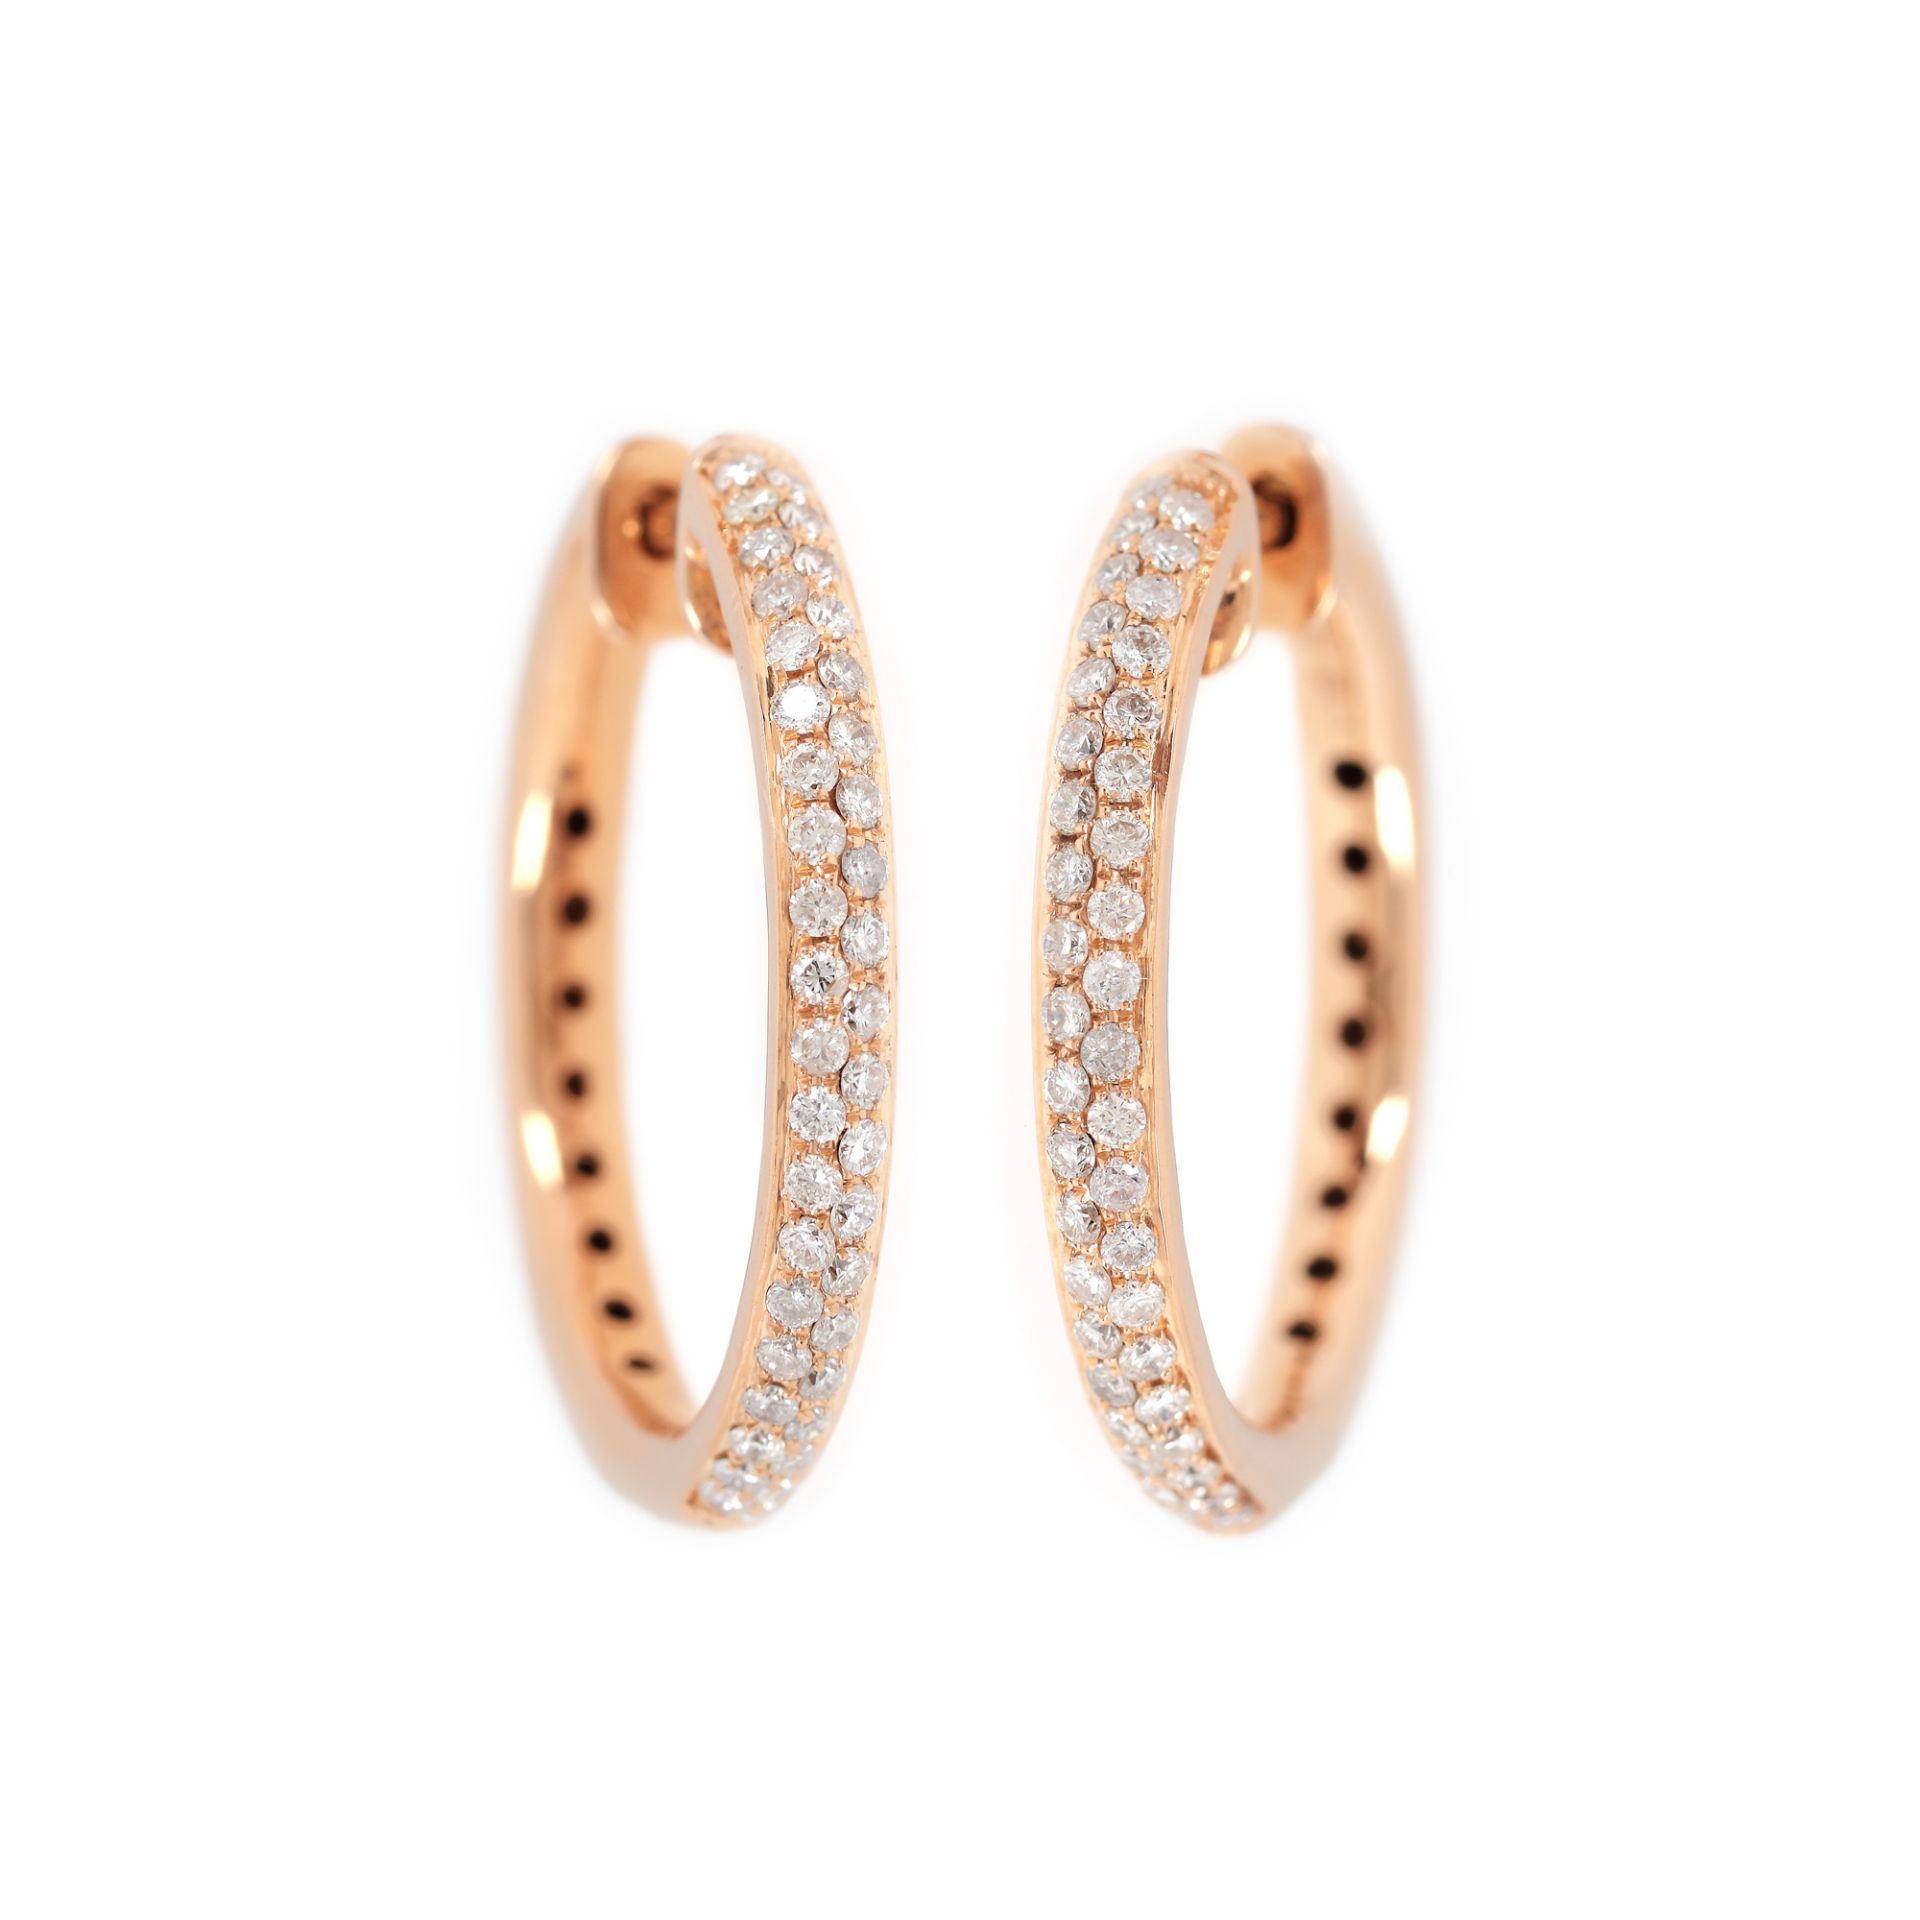 Rose gold earrings, paved with diamonds